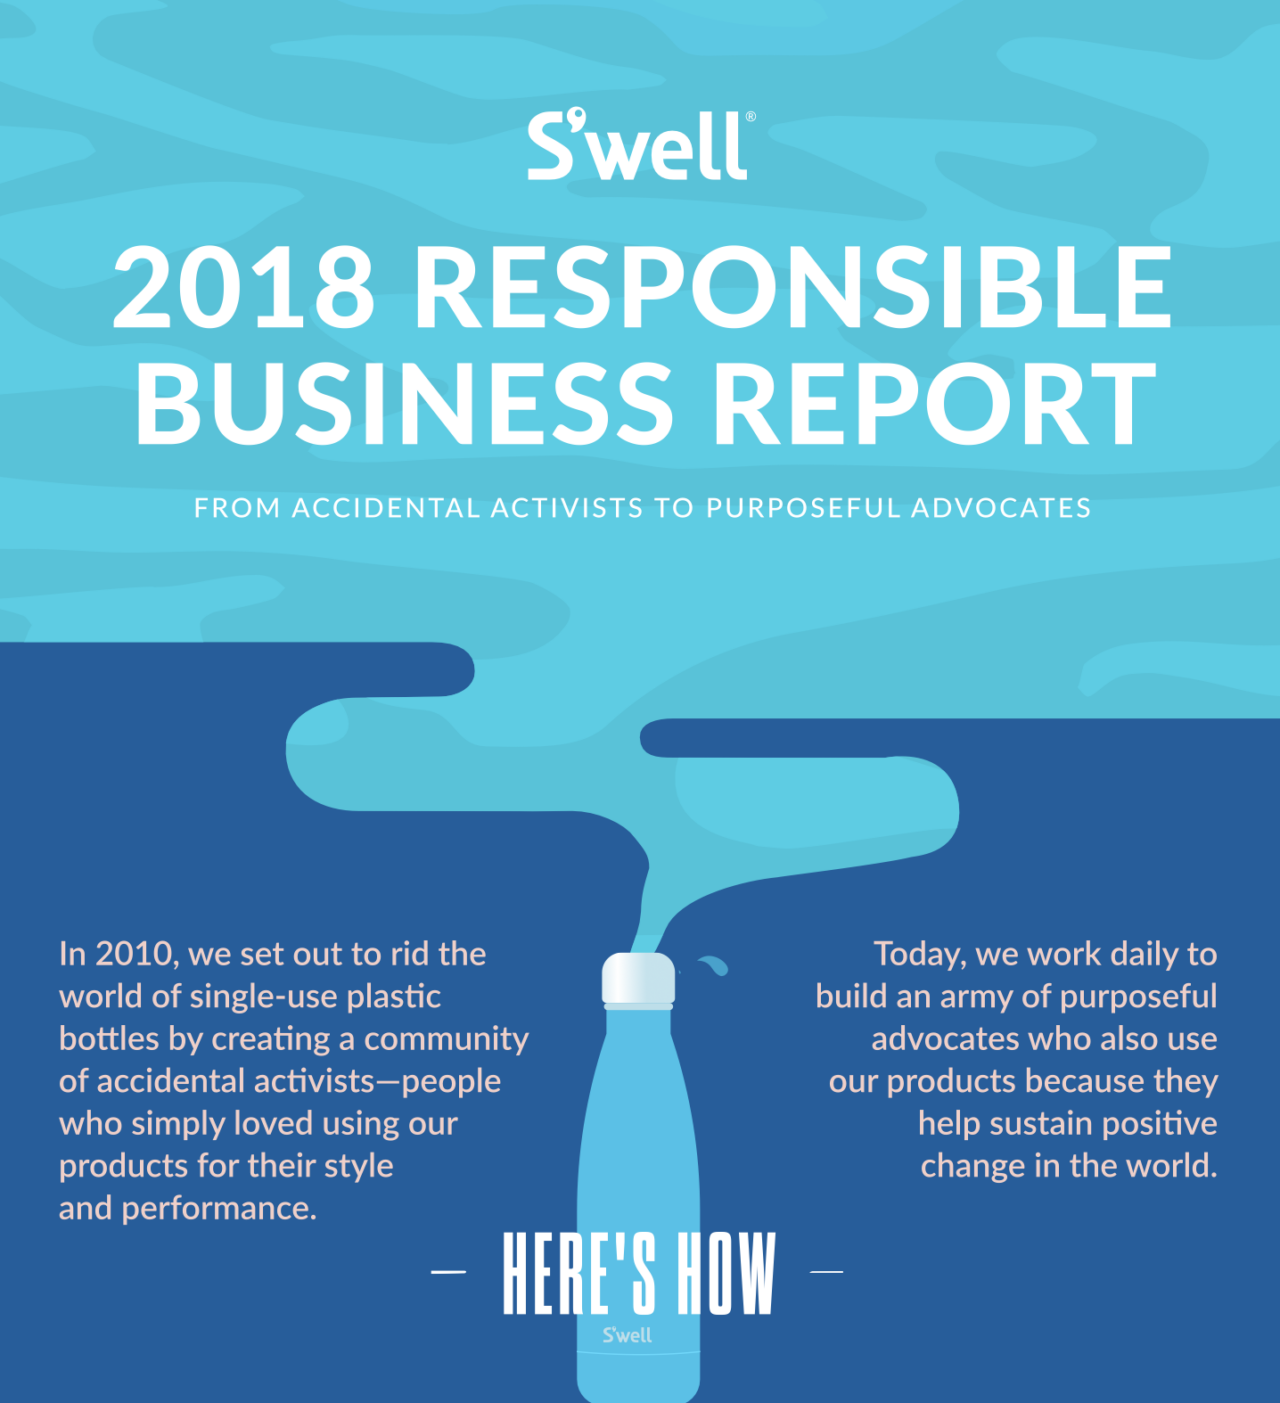 S'well Responsible Business Report Animated Infographic Preview